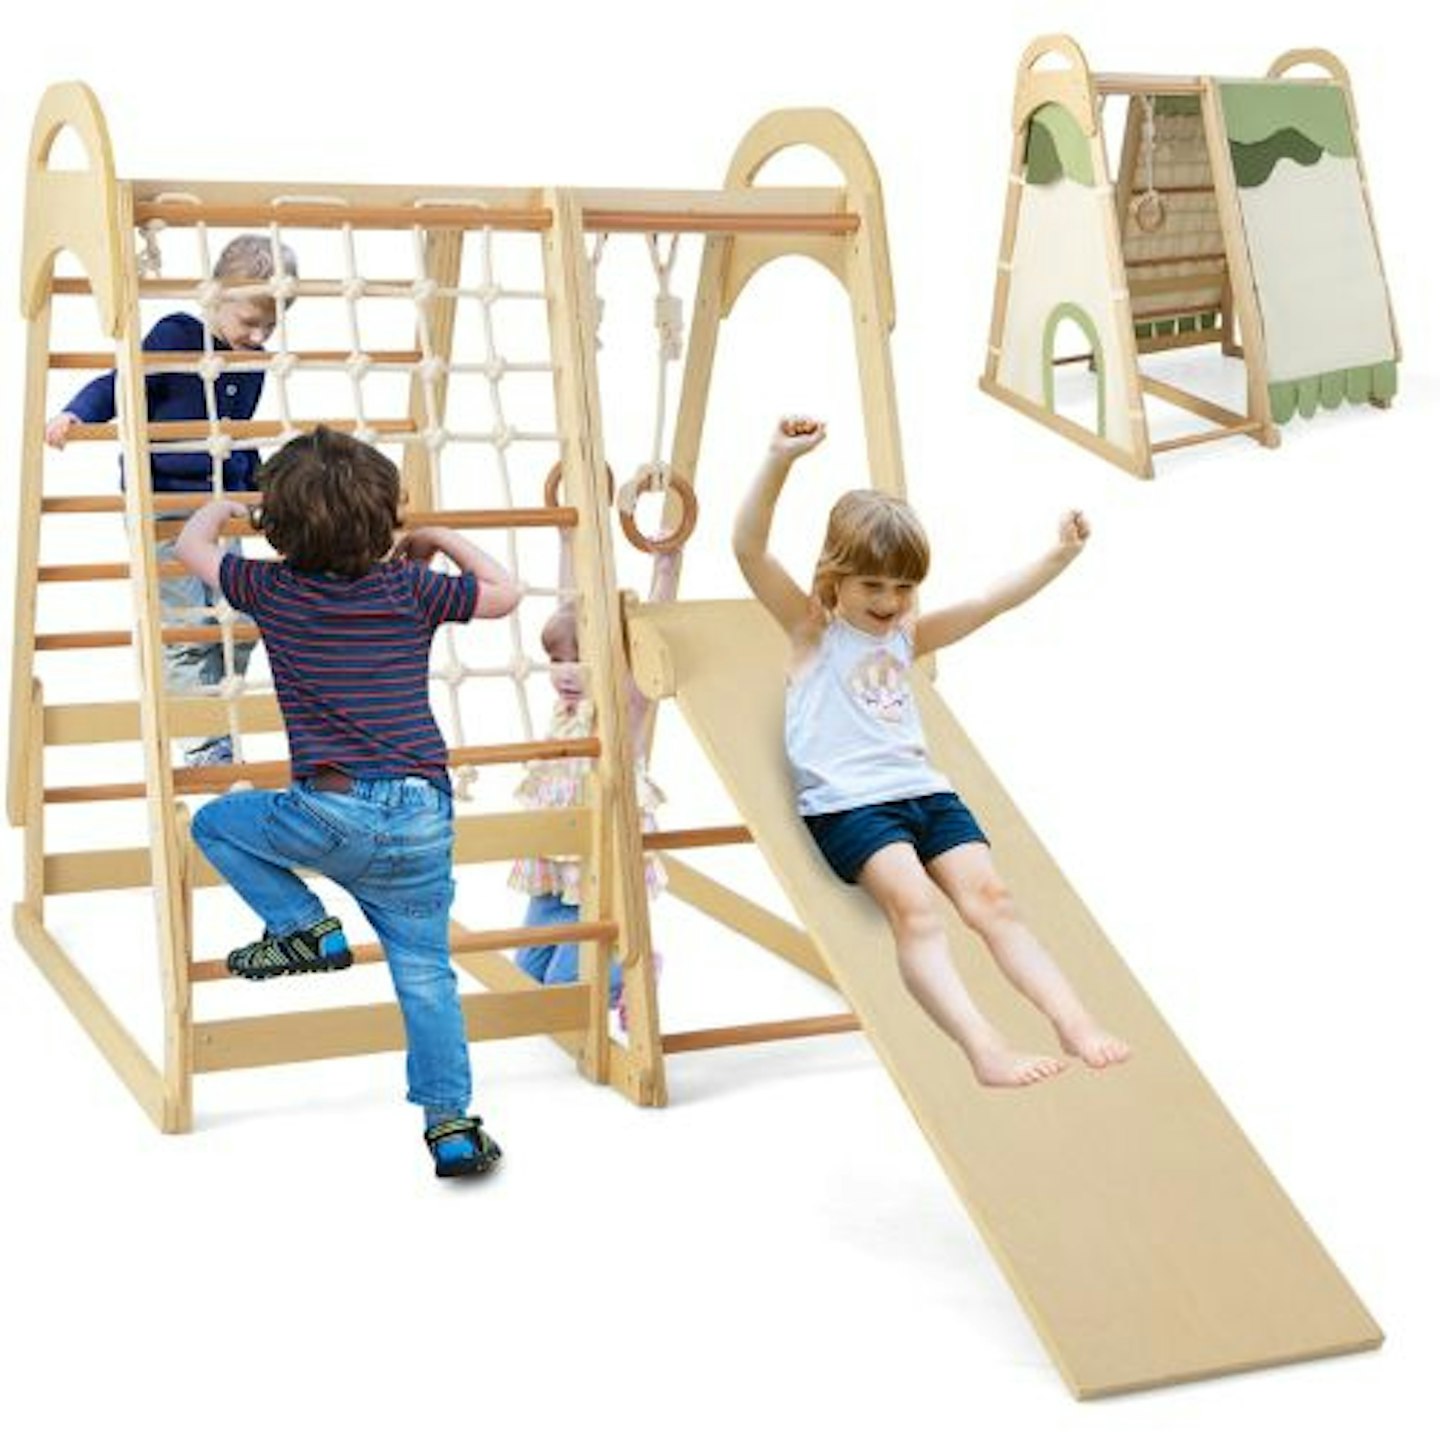 Best indoor climbers for toddlers Costway Multi-functional Kid's Climbing Toy Indoor Jungle Gym Play Set